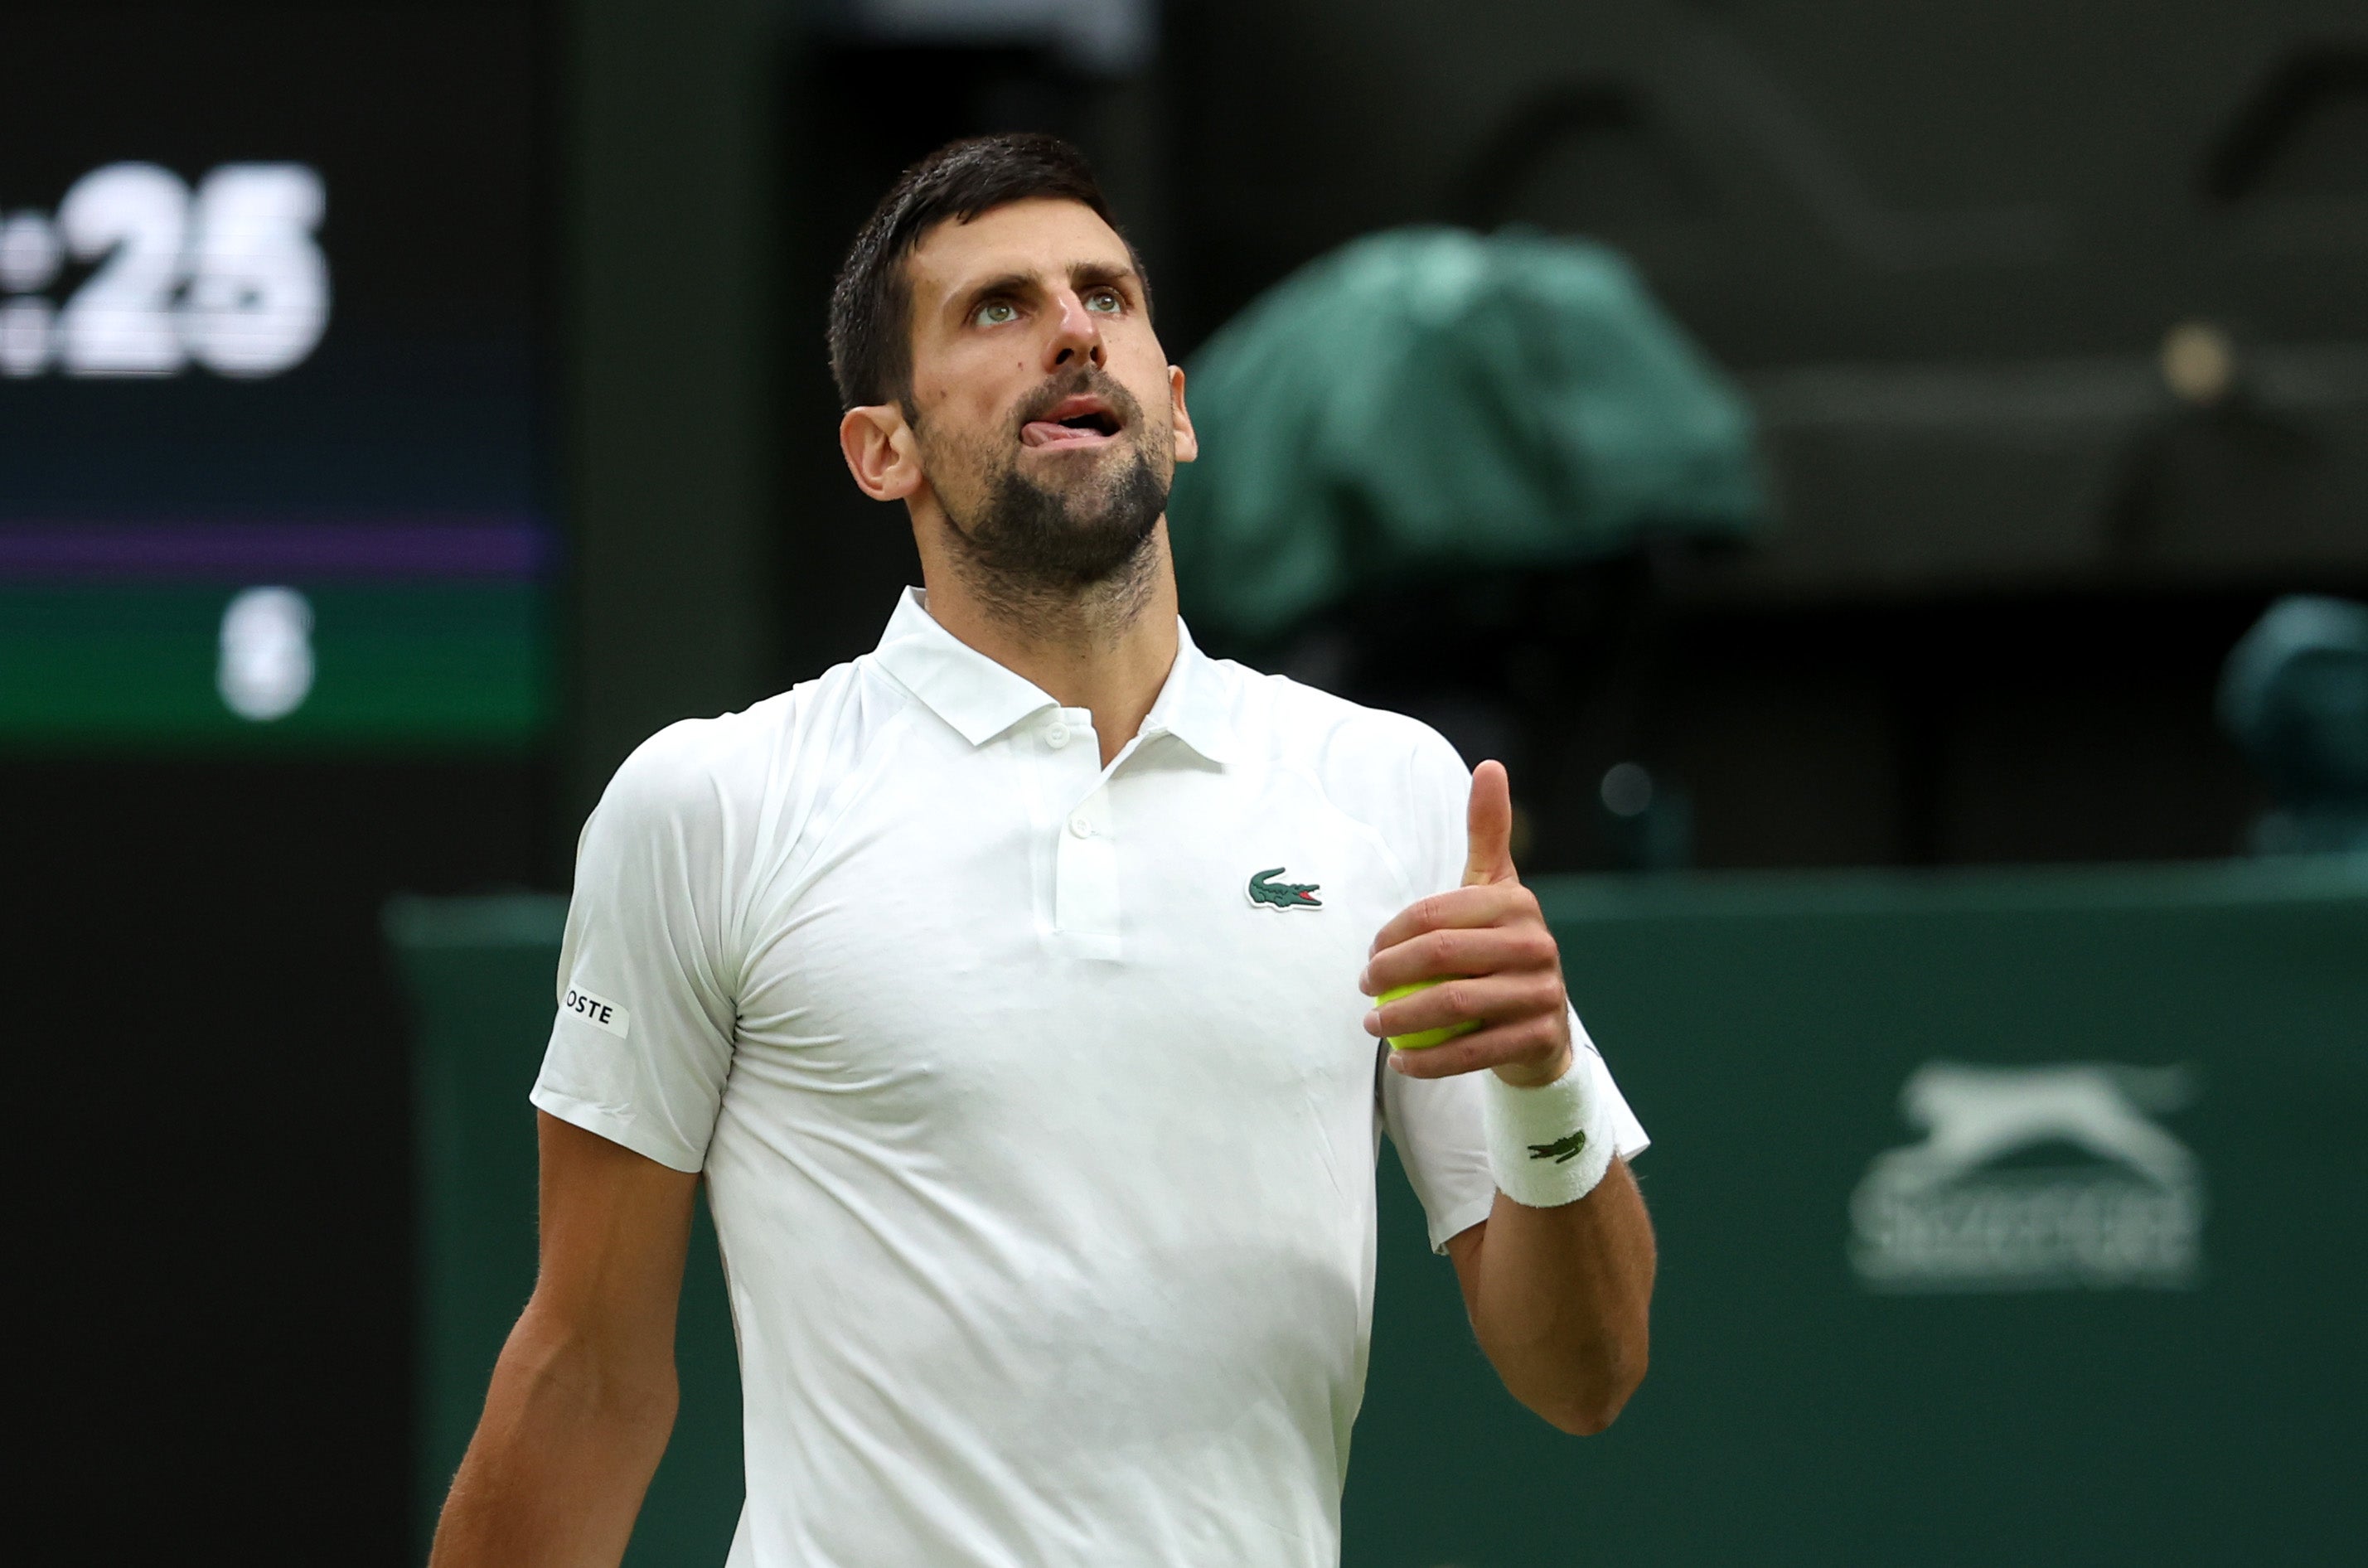 Djokovic reacts after noise from the crowd in between serves